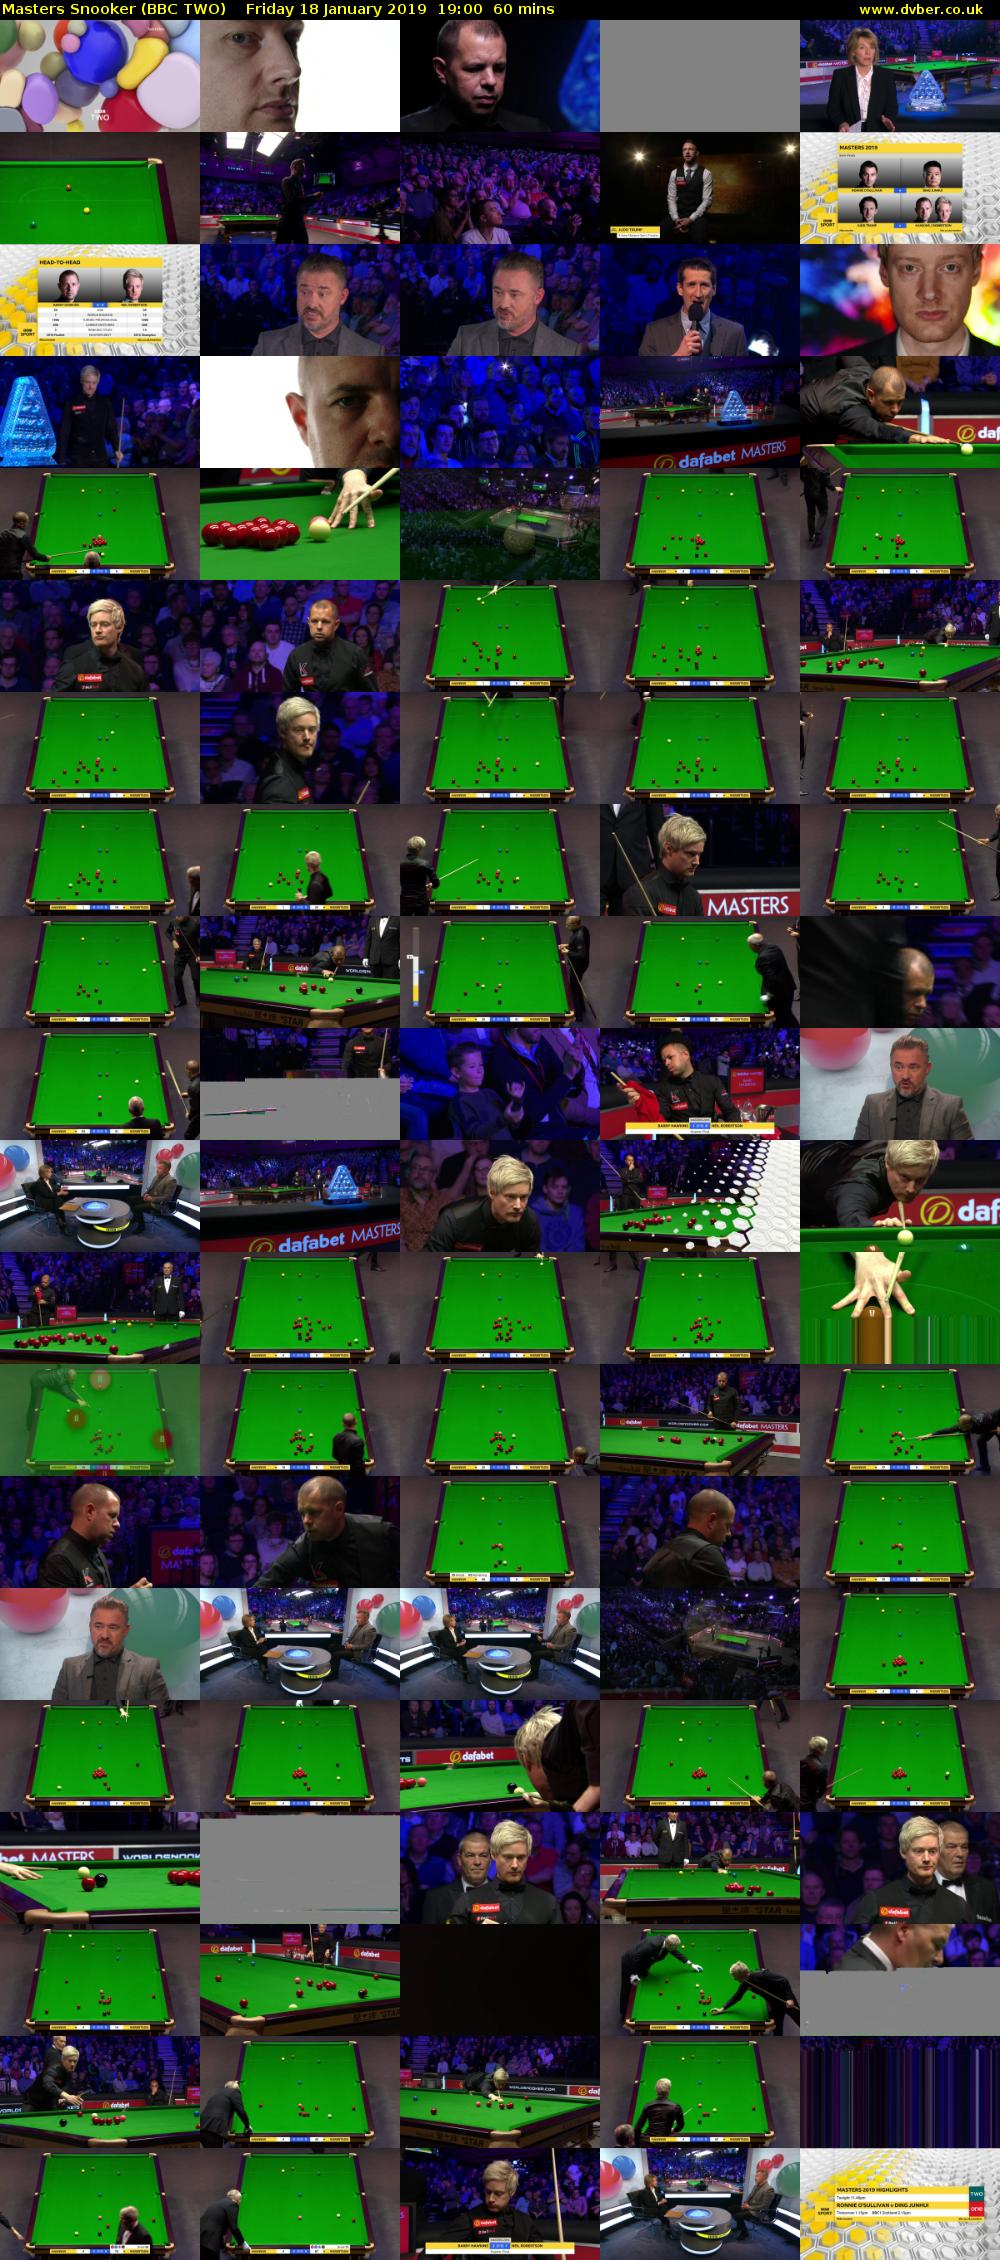 Masters Snooker (BBC TWO) Friday 18 January 2019 19:00 - 20:00